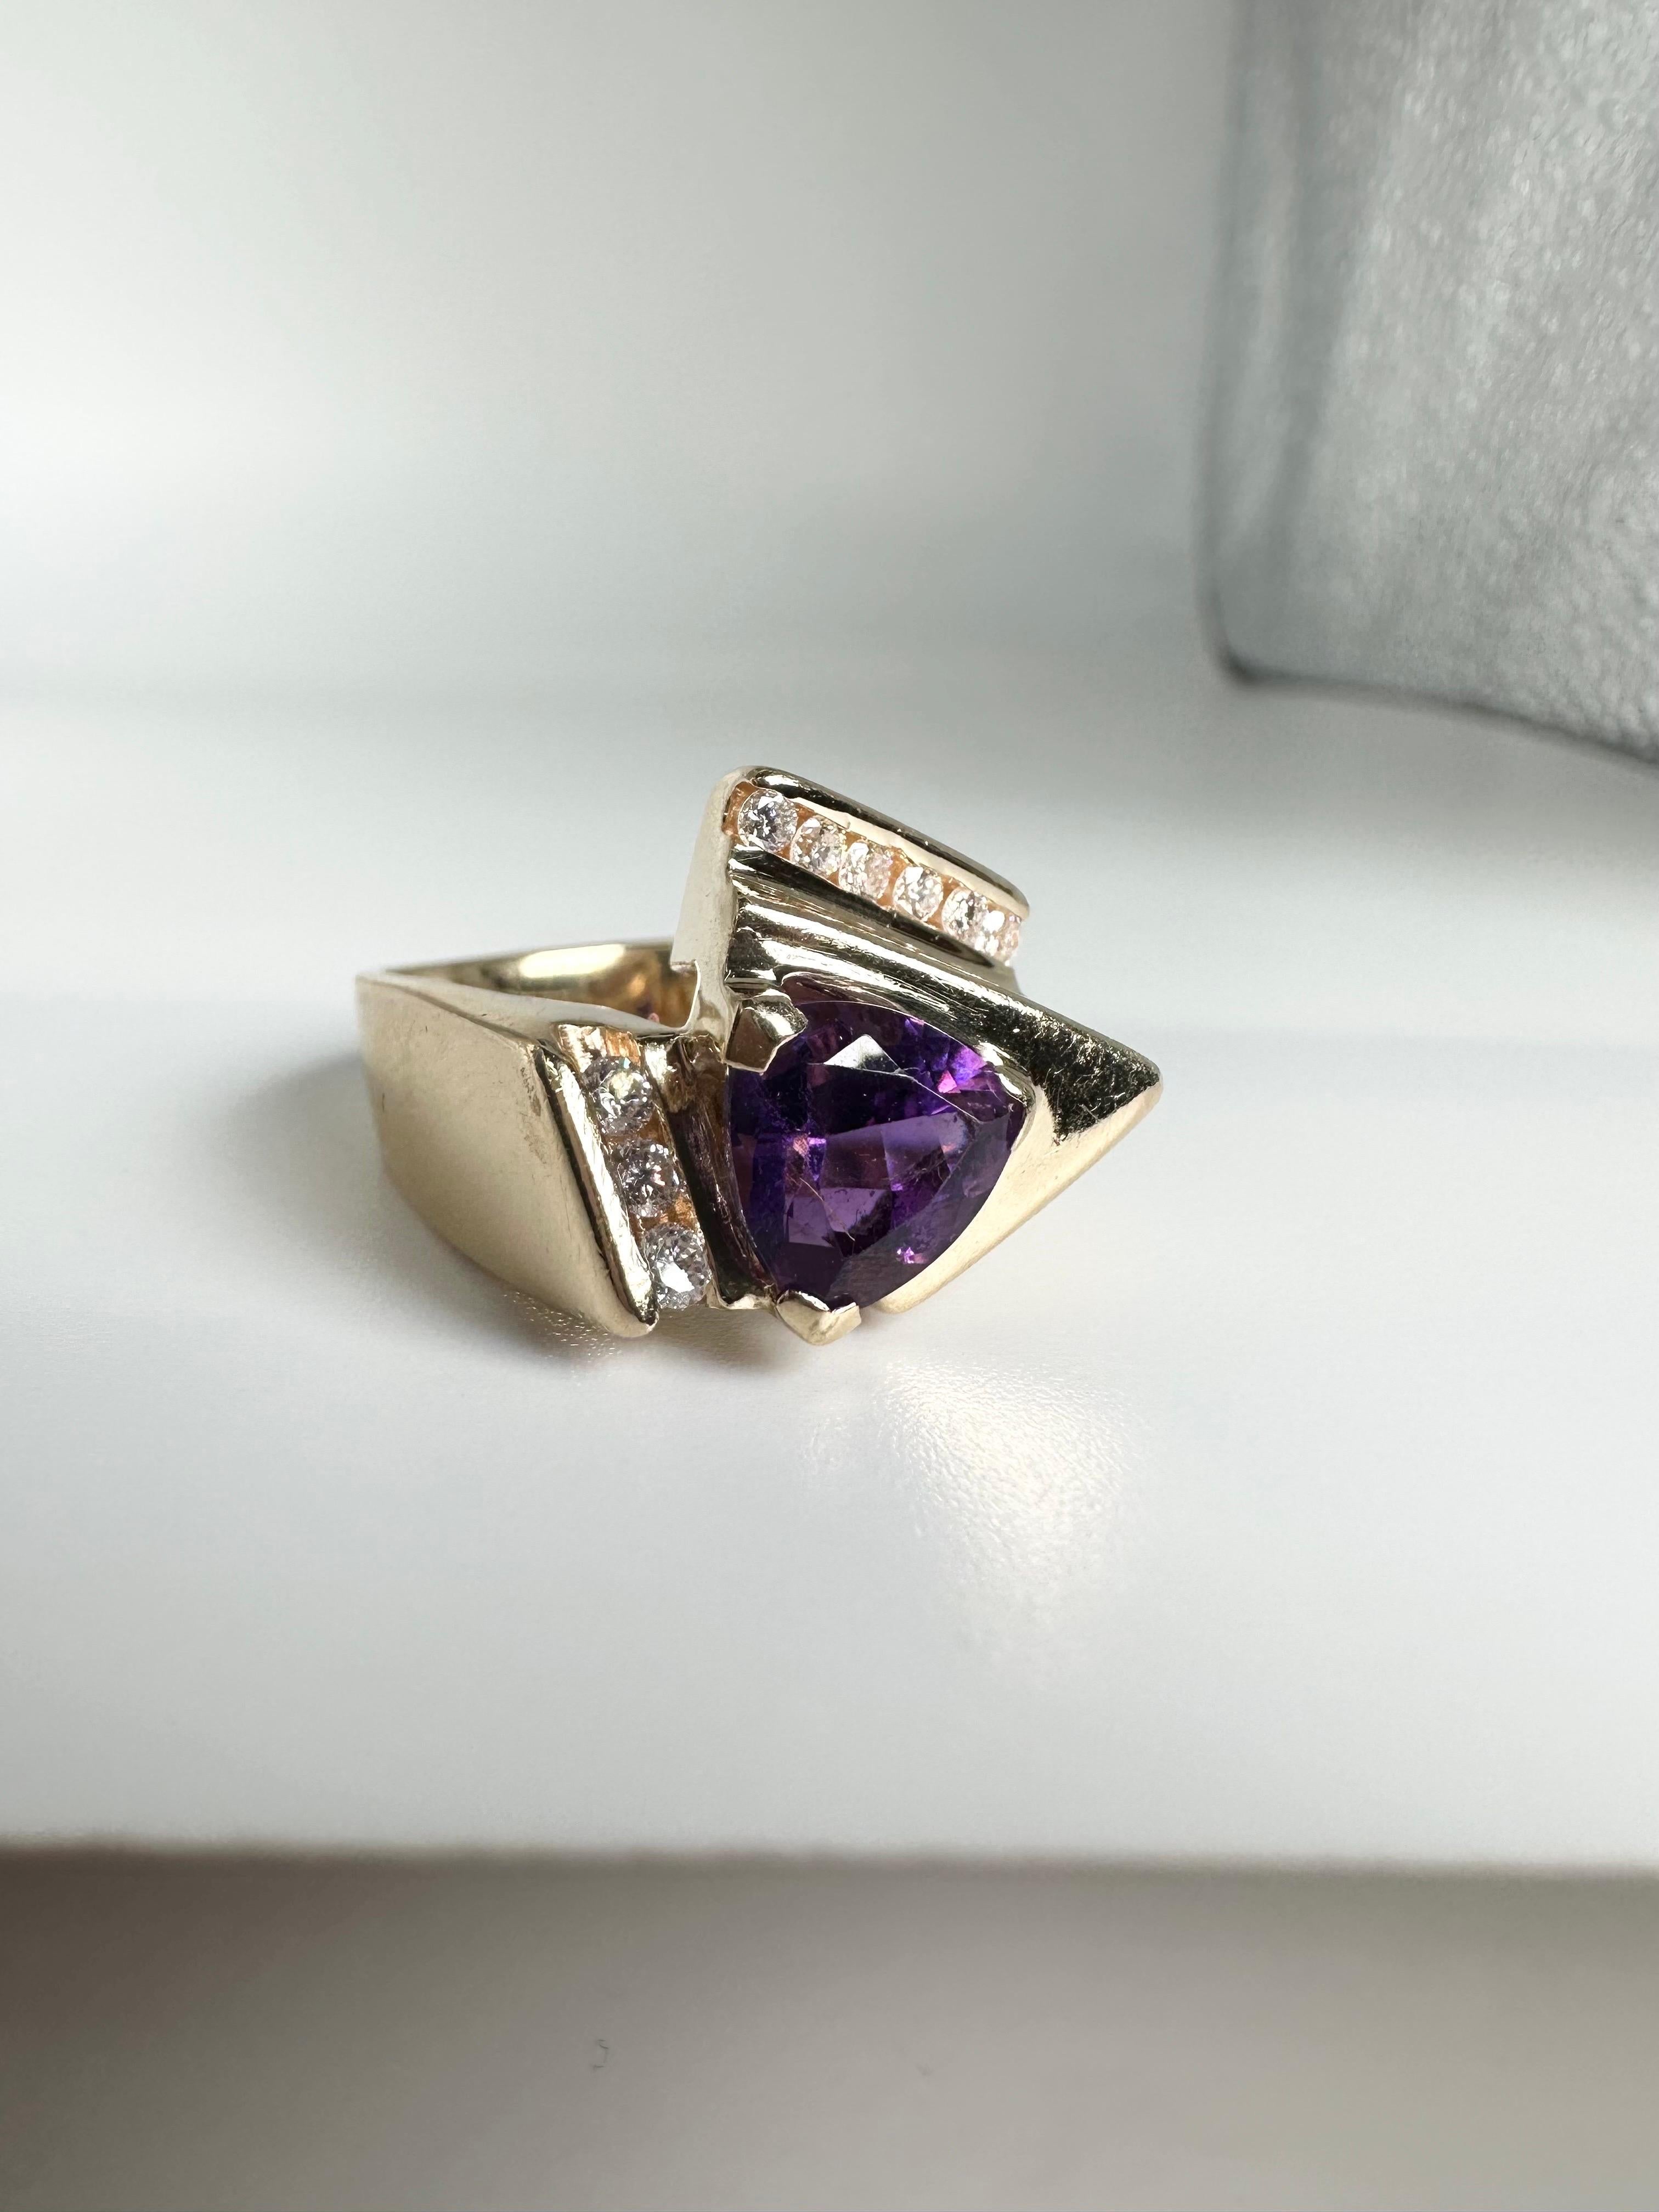 Lovely amethyst ring with diamonds made in art deco style! The center is 8.5mm trillion with beautiful purple rich color!

GOLD: 18KT gold
NATURAL DIAMOND(S)
Clarity/Color: VS/F
Carat:0.27ct 
Cut:Heart Brilliant
Grams:11.54
Item 20000071eaf

WHAT